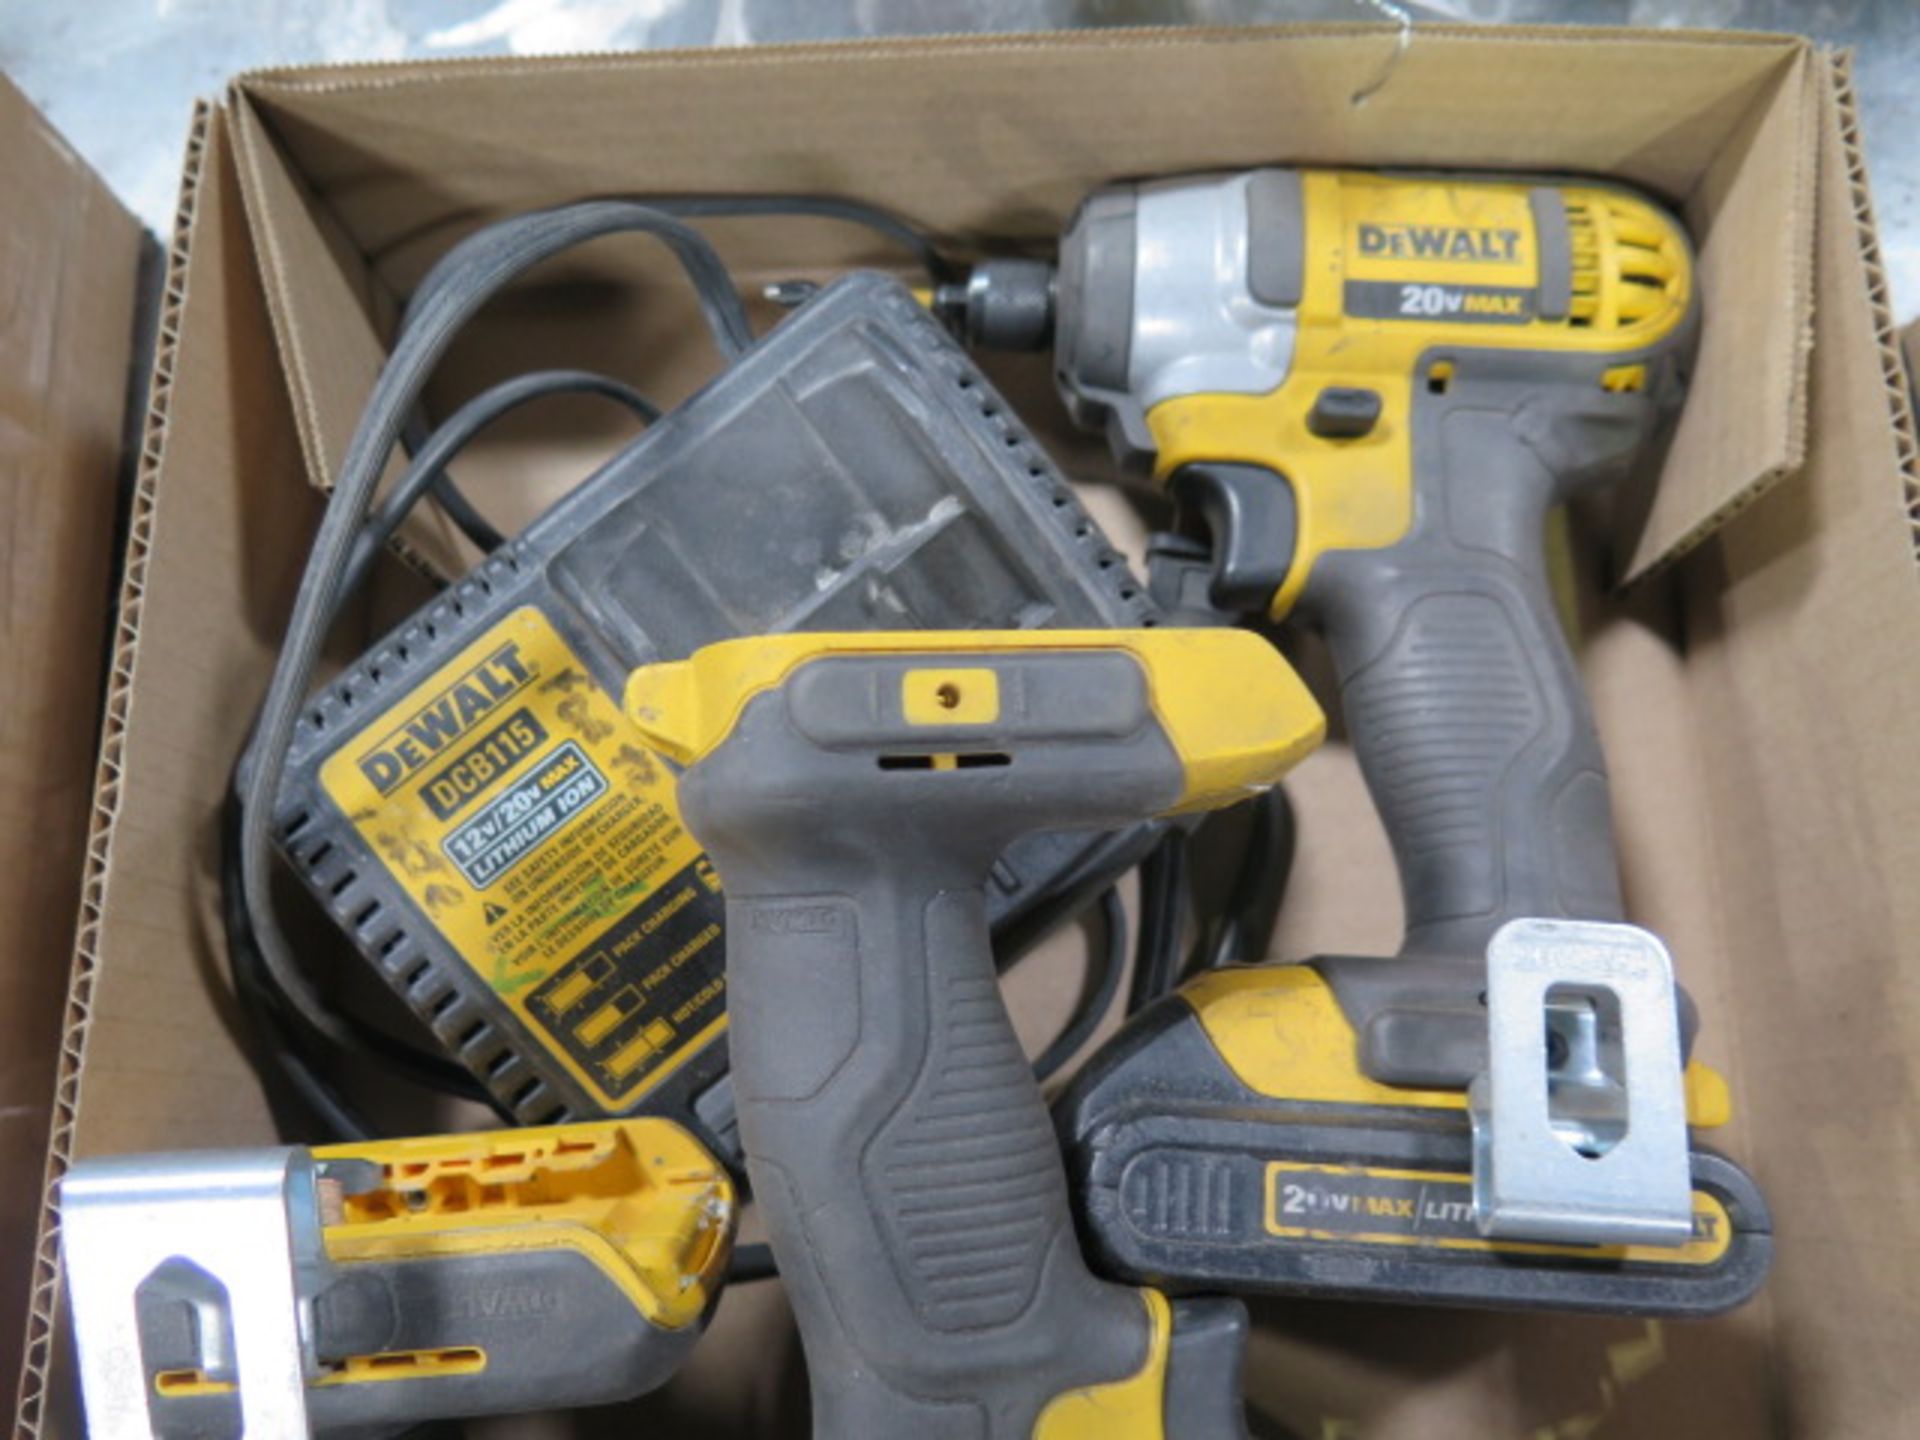 DeWalt 20 Volt Cordless Drills and Nut Drivers w/ Charger (SOLD AS-IS - NO WARRANTY) - Image 4 of 6